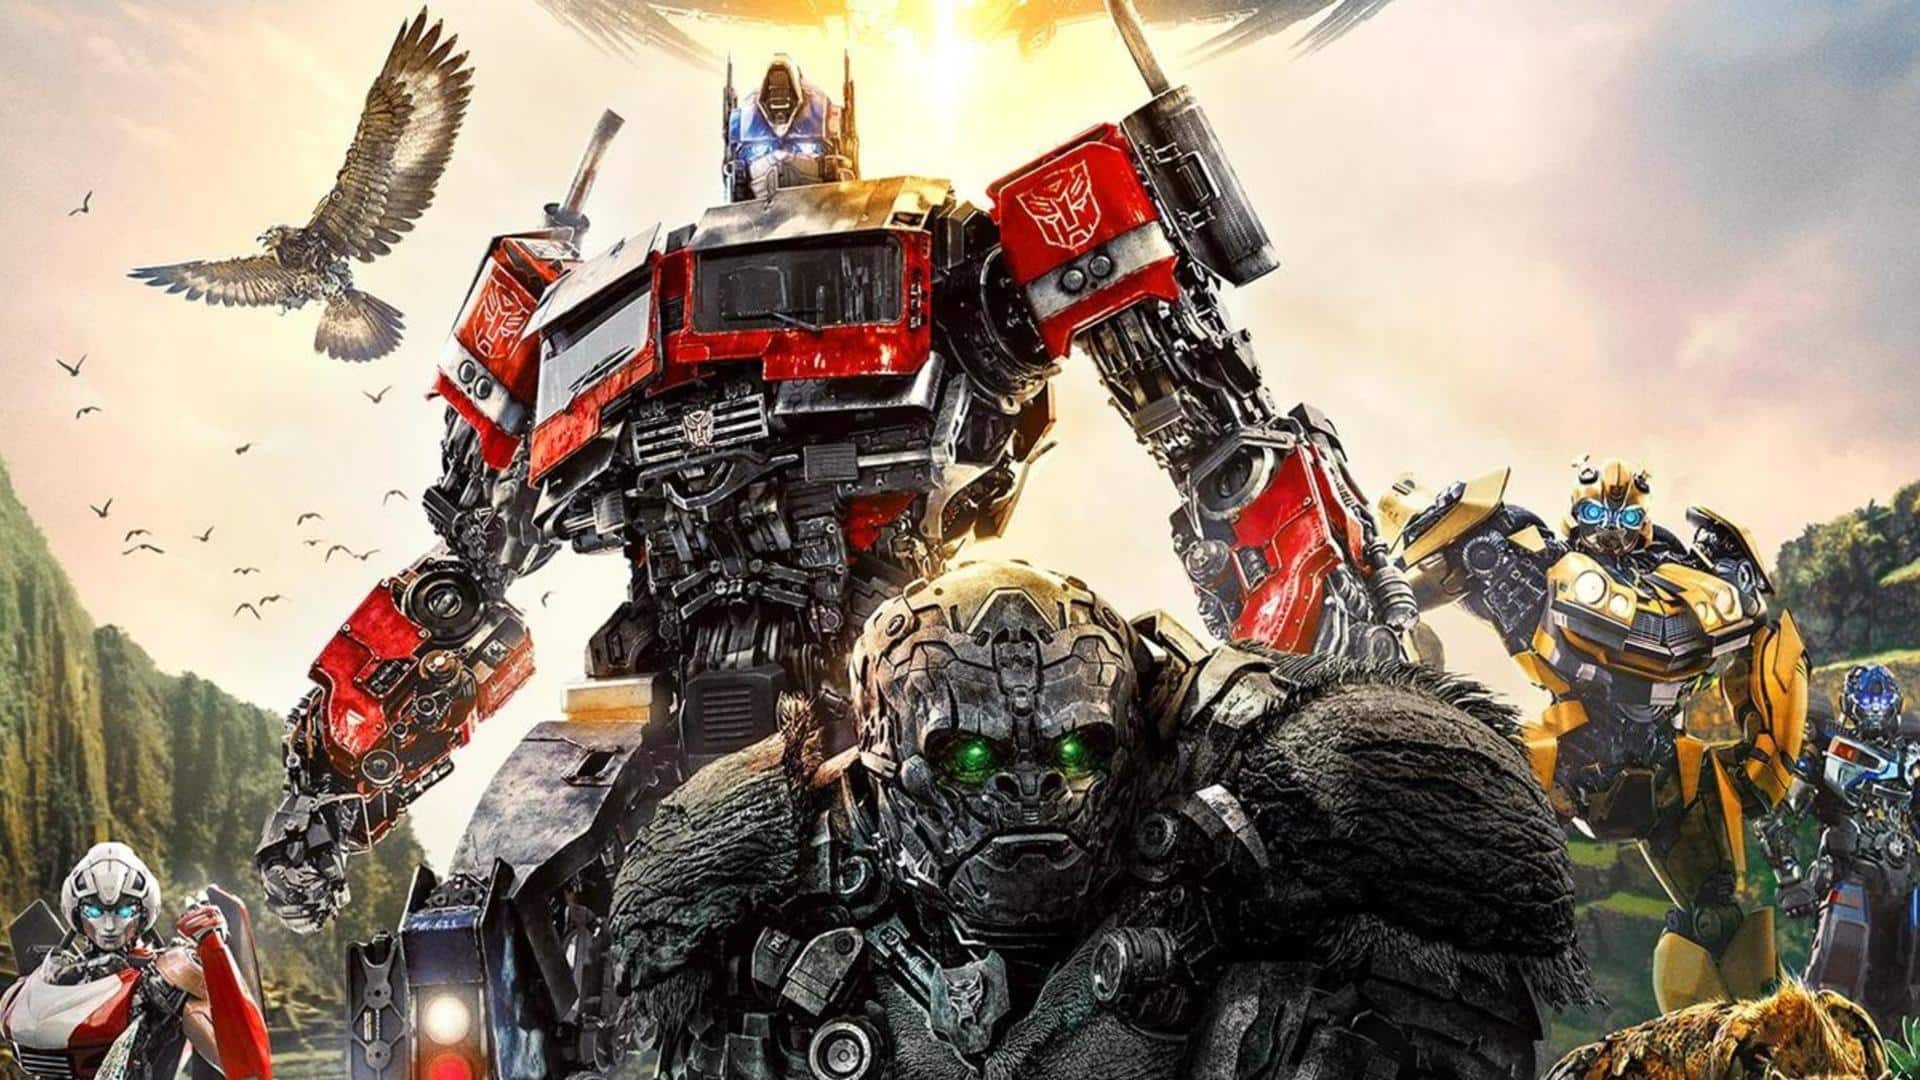 #BoxOfficeBuzz: 'Transformers' to rake in over $155M on opening weekend